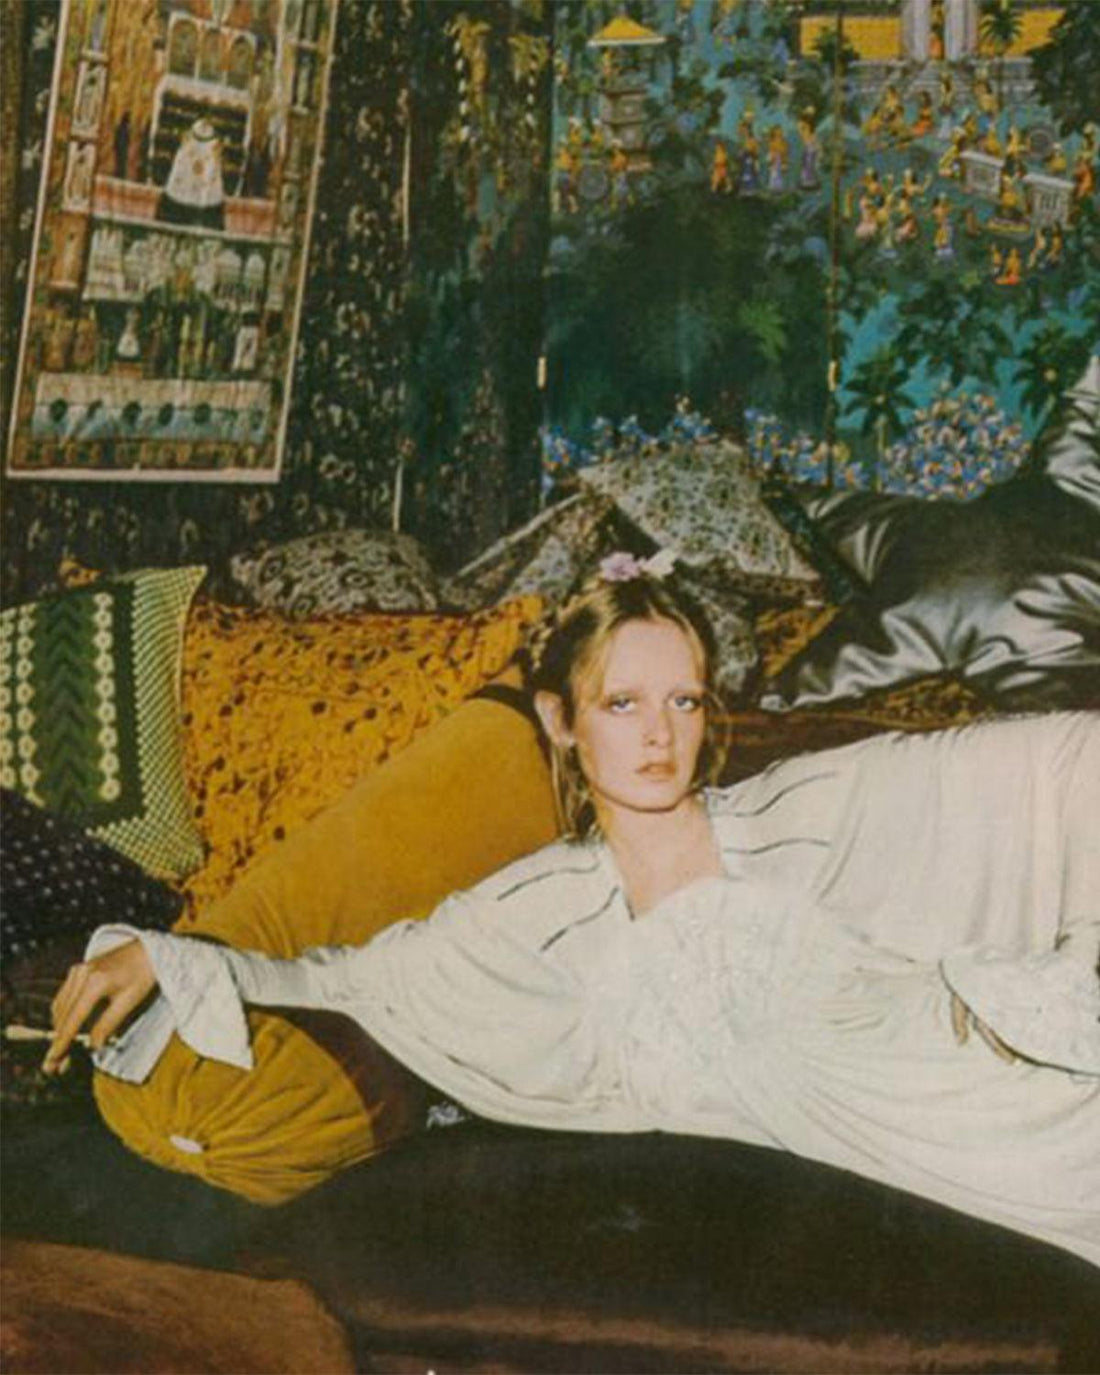 Twiggy the model laying on a sofa with a cigarette in her hand, surrounded by yellow and green floral pillows. A floral printed blue and green wall paper on the walls